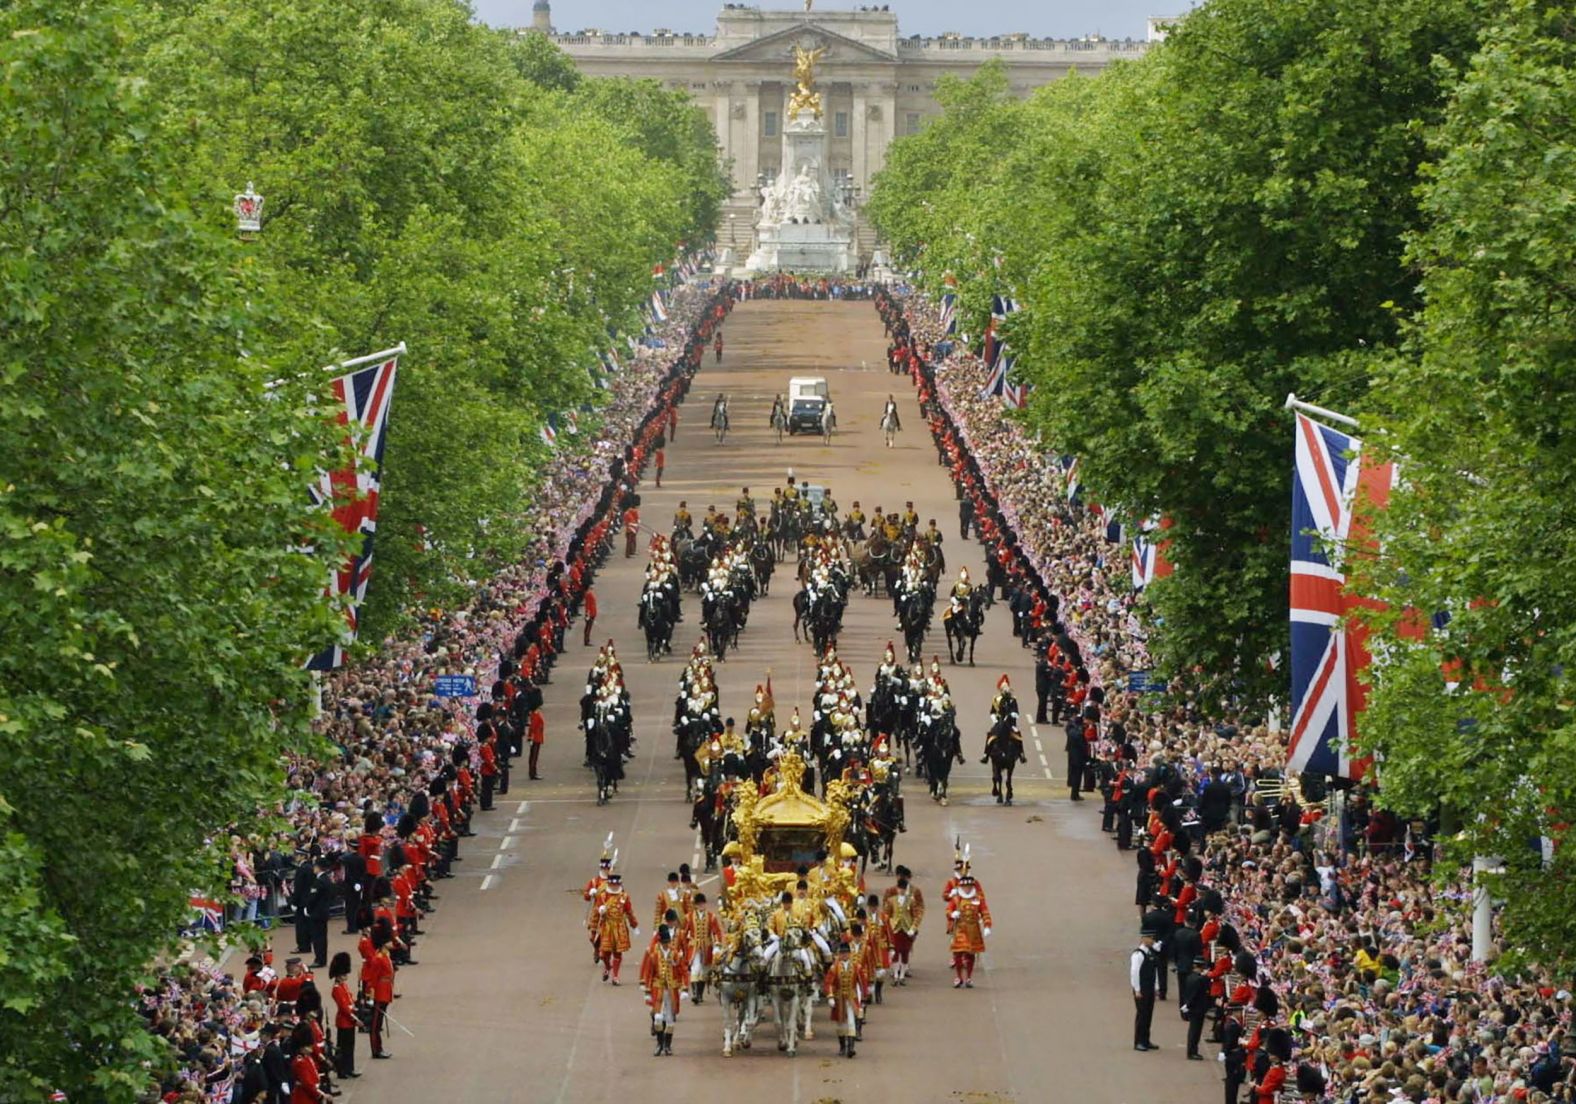 Huge crowds flood both sides of the Mall in central London to see the Queen and the Duke of Edinburgh travel to St. Paul's Cathedral for a service of thanksgiving to celebrate the Golden Jubilee, on June 4, 2002.